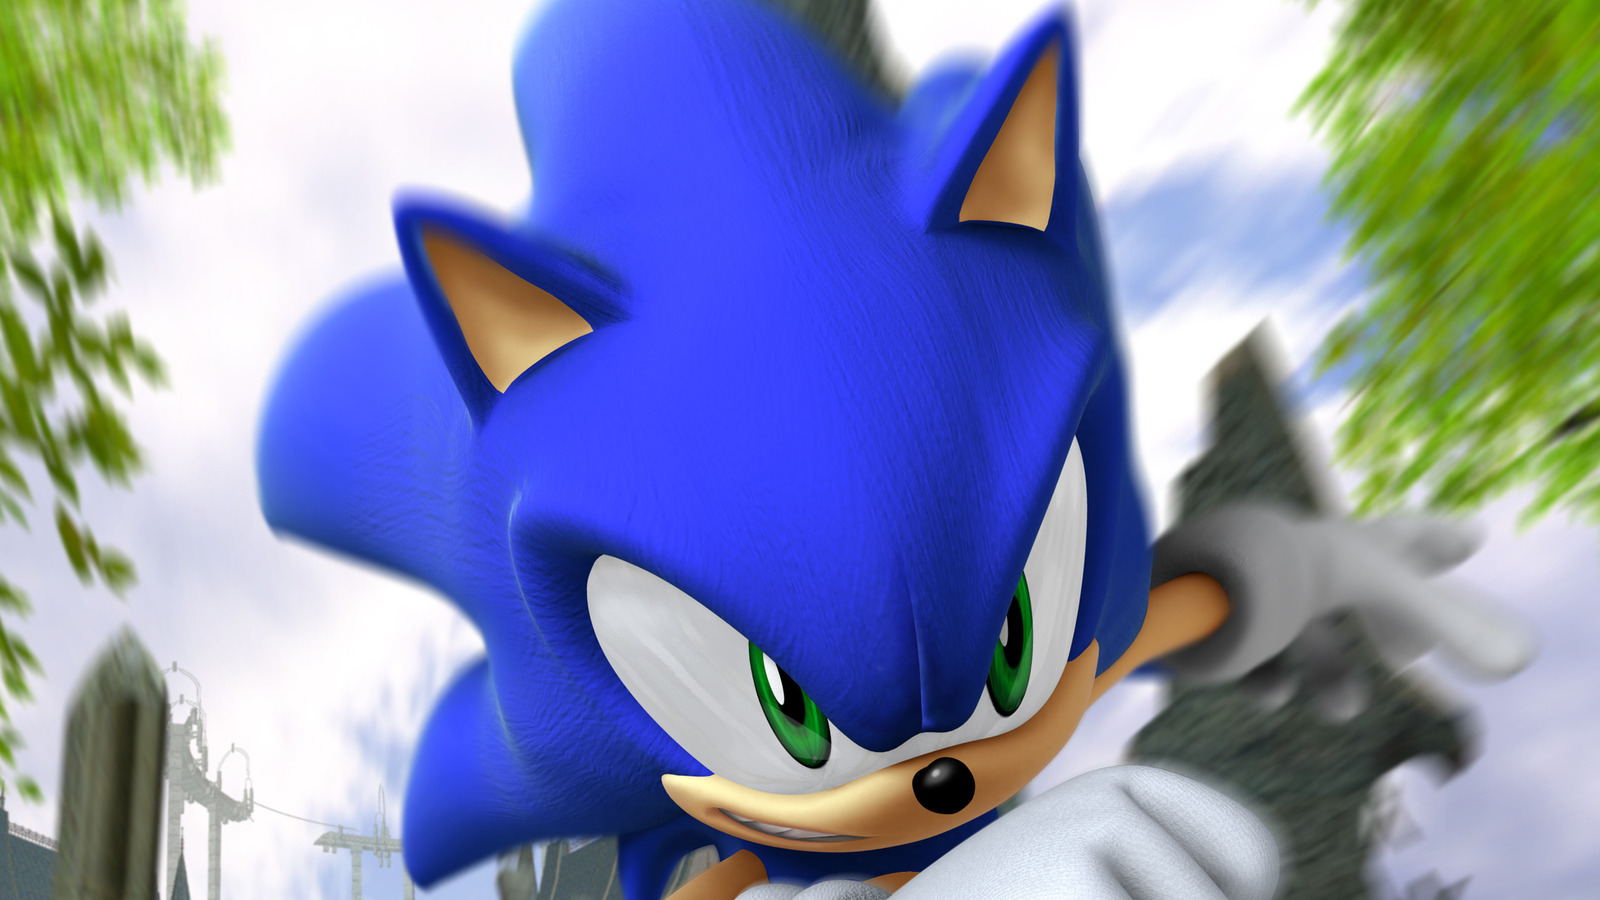 Tails Sonic Chaos Sonic the Hedgehog Sonic Advance Sonic Boom